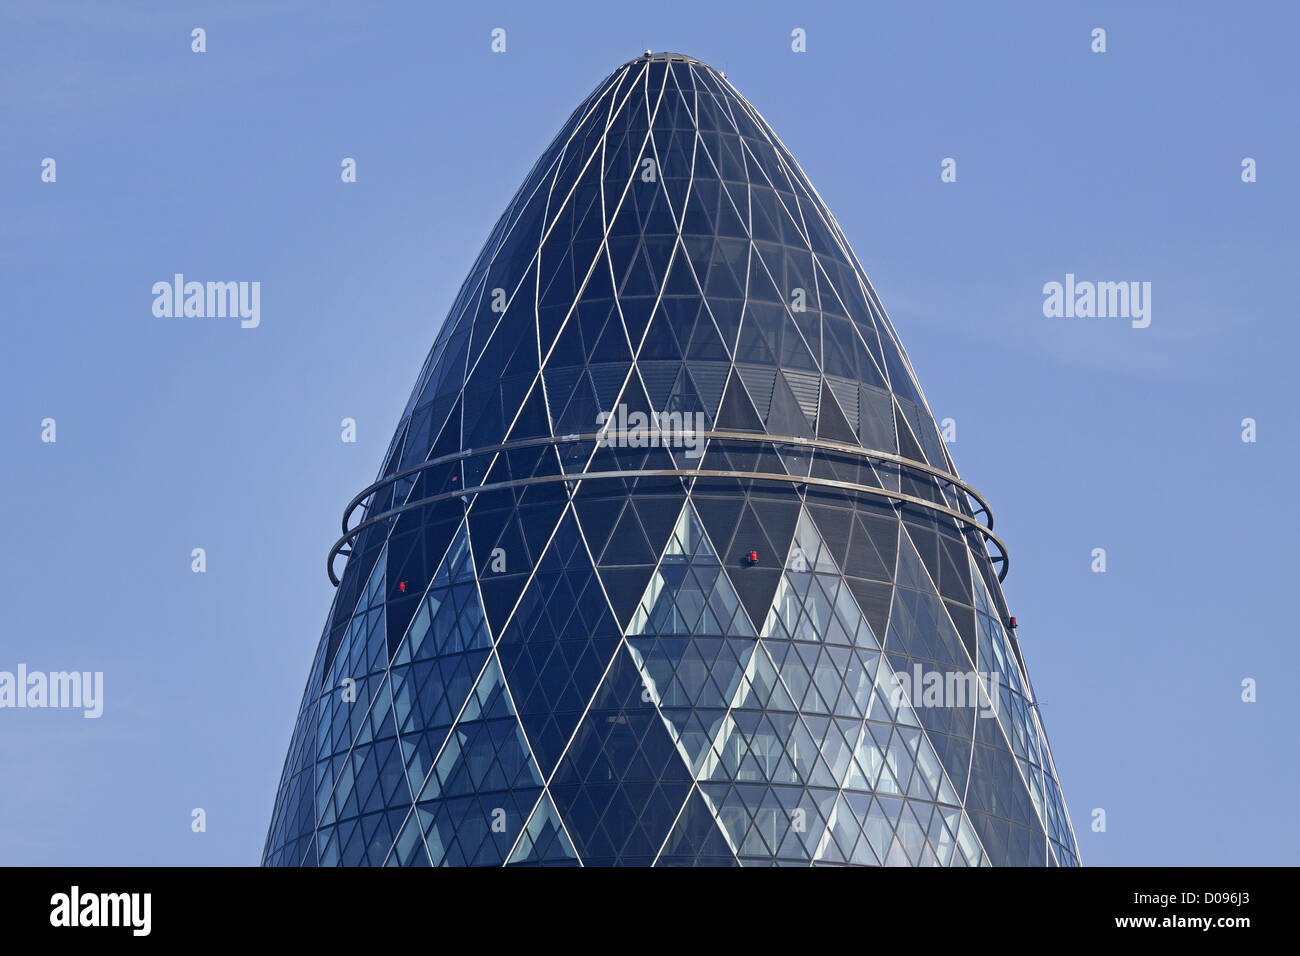 TOP SWISS RE BUILDING 30 ST MARY AXE BUILDING BUILT IN HEART CITY ...